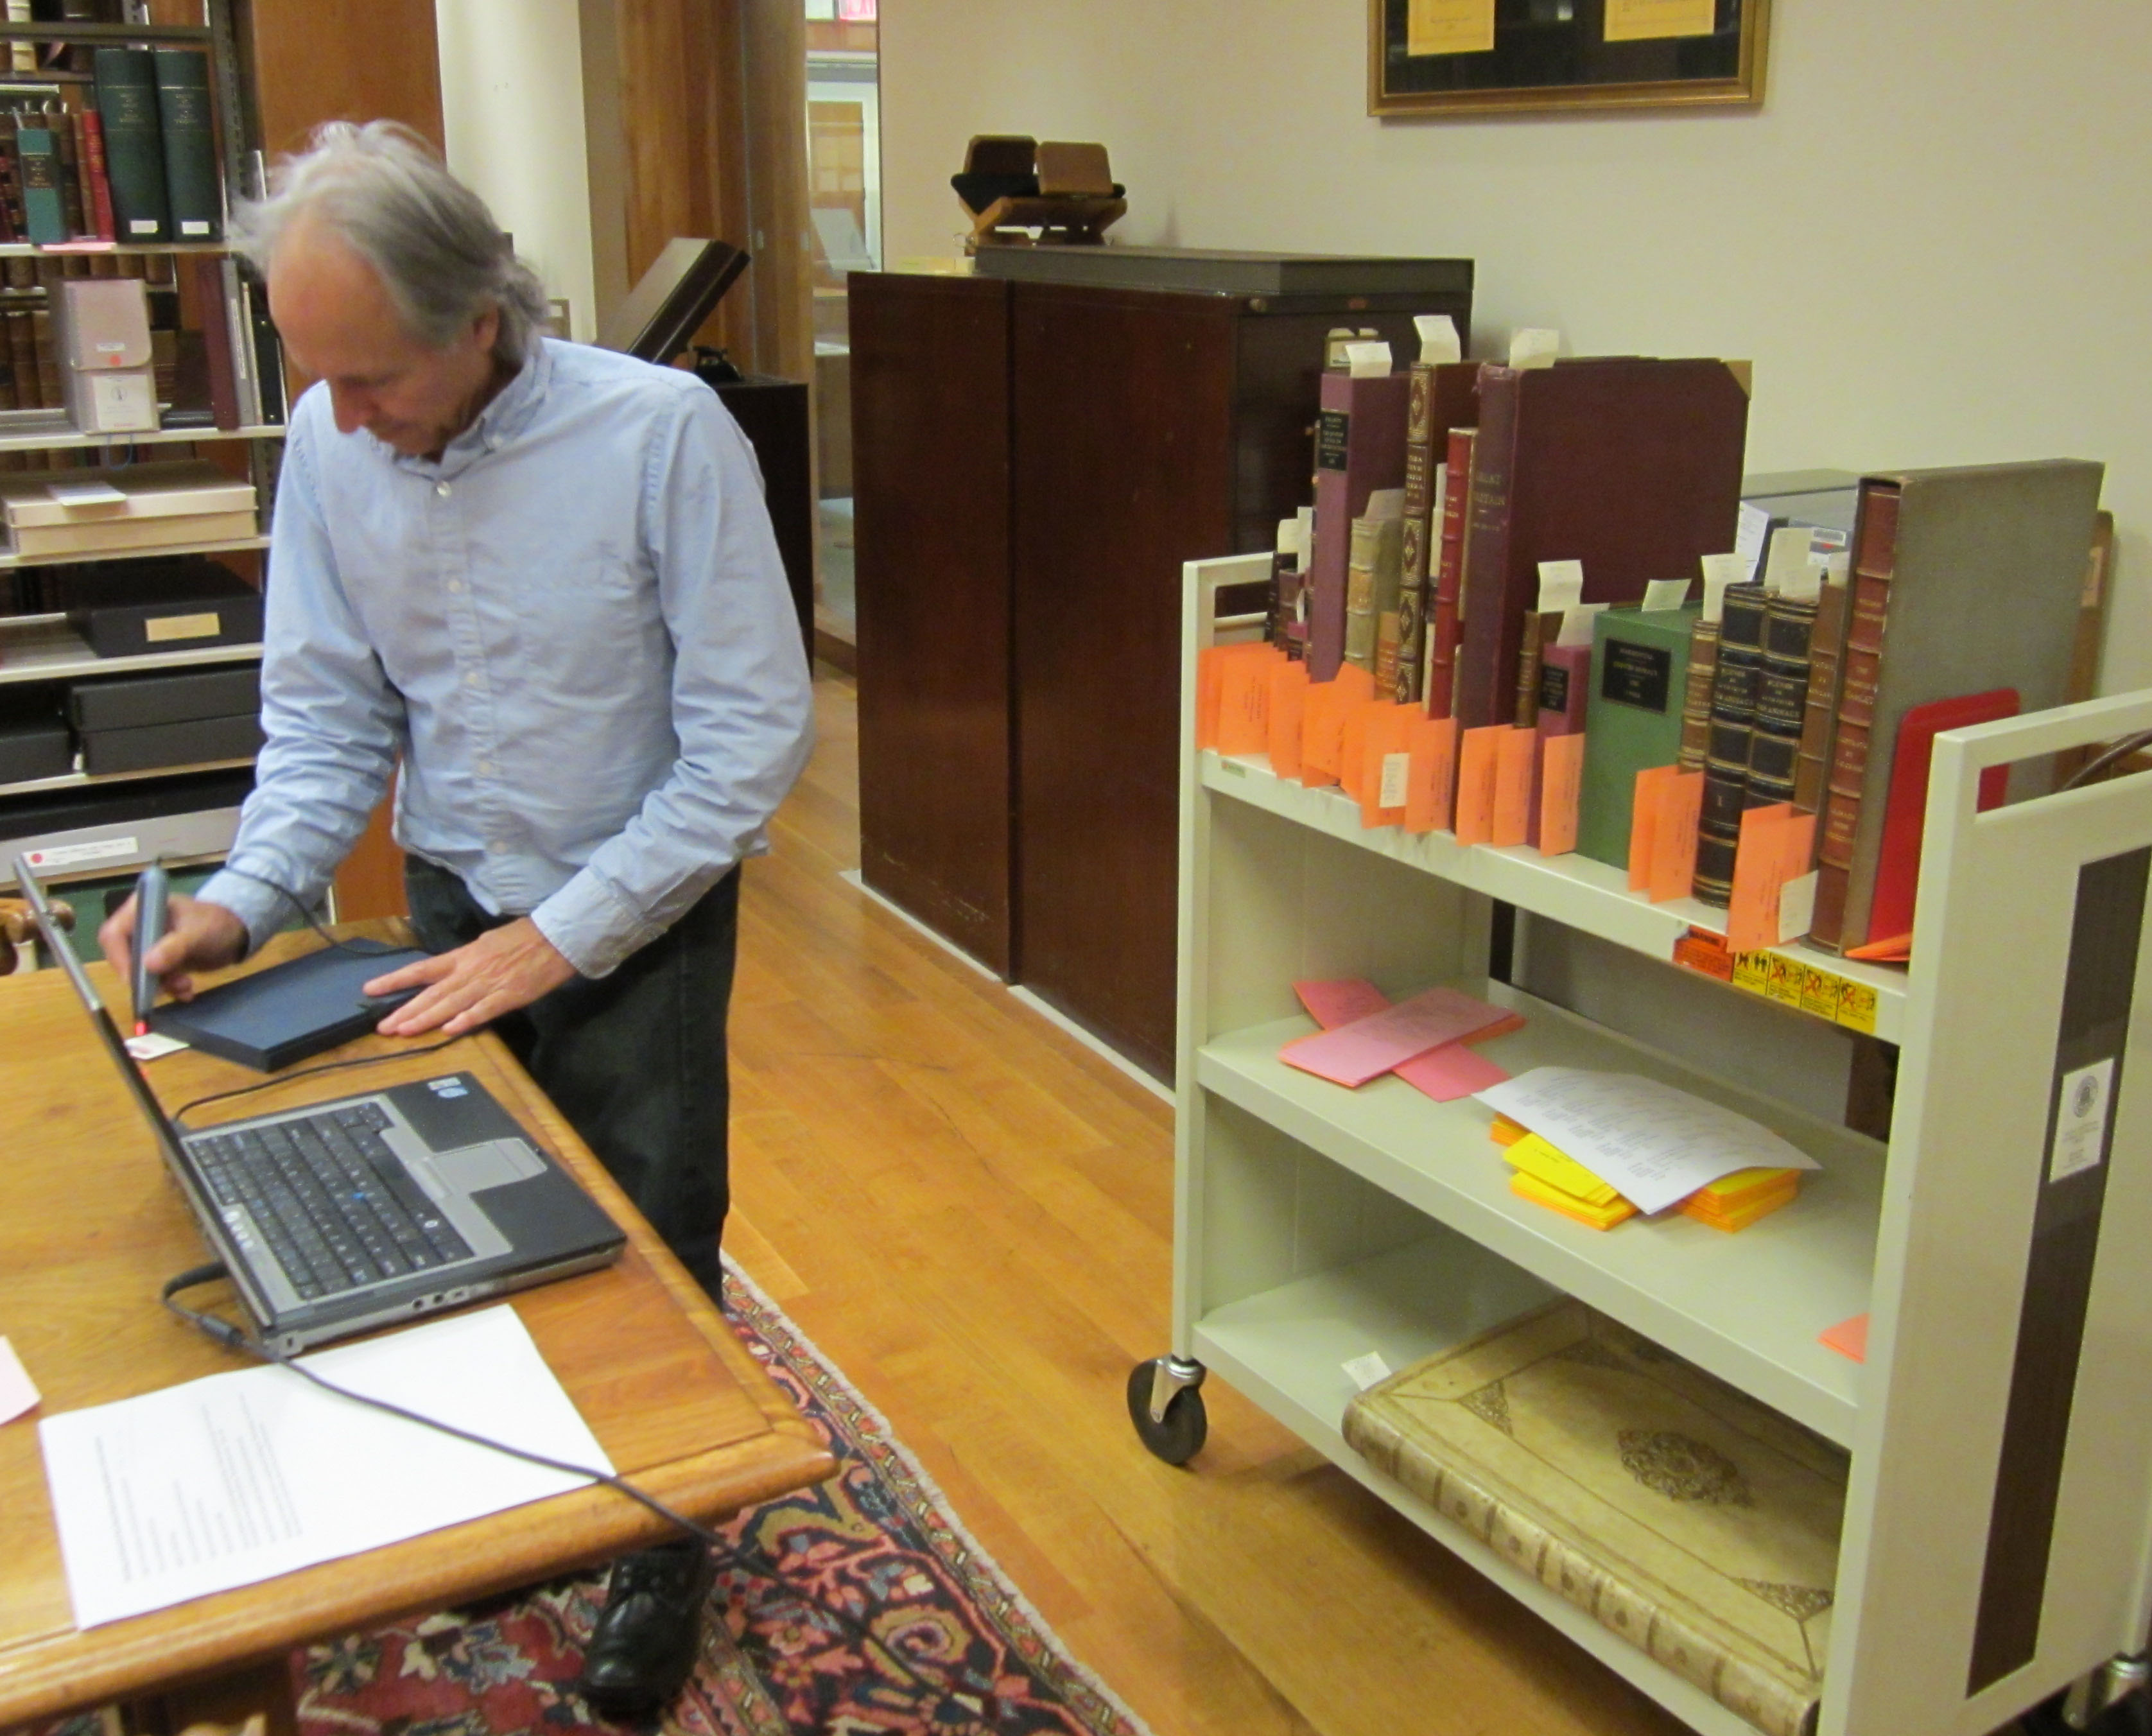 George Riser checks out Special Collections books for RBS.(Photograph by Petrina Jackson)